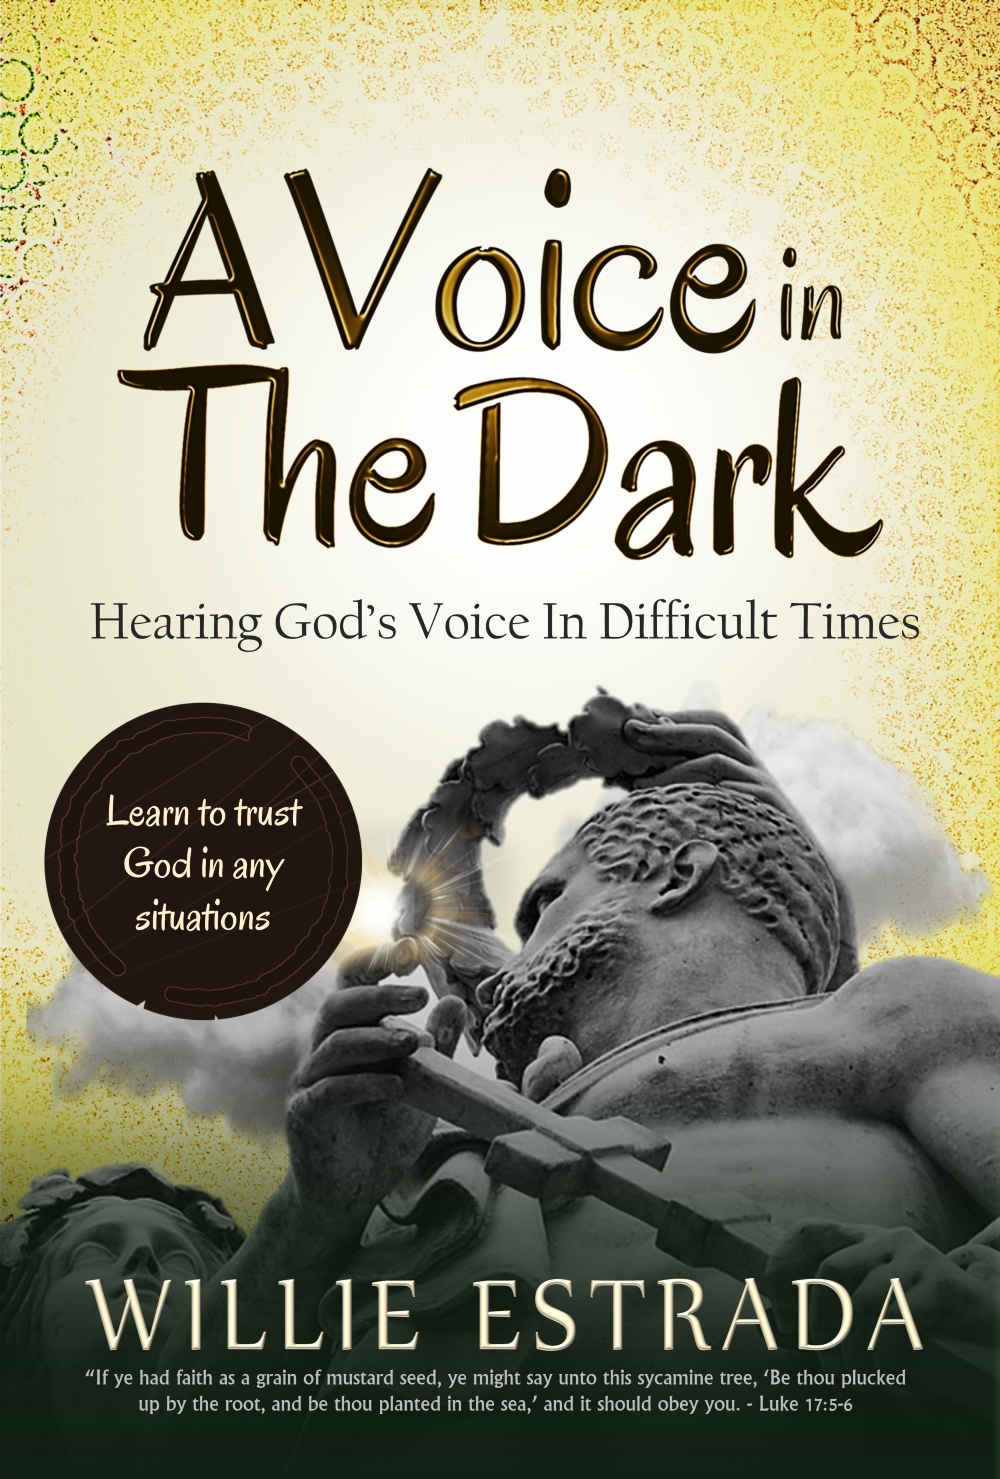 FREE: A Voice In The Dark: Hearing God’s Voice In Difficult Times by Willie Estrada